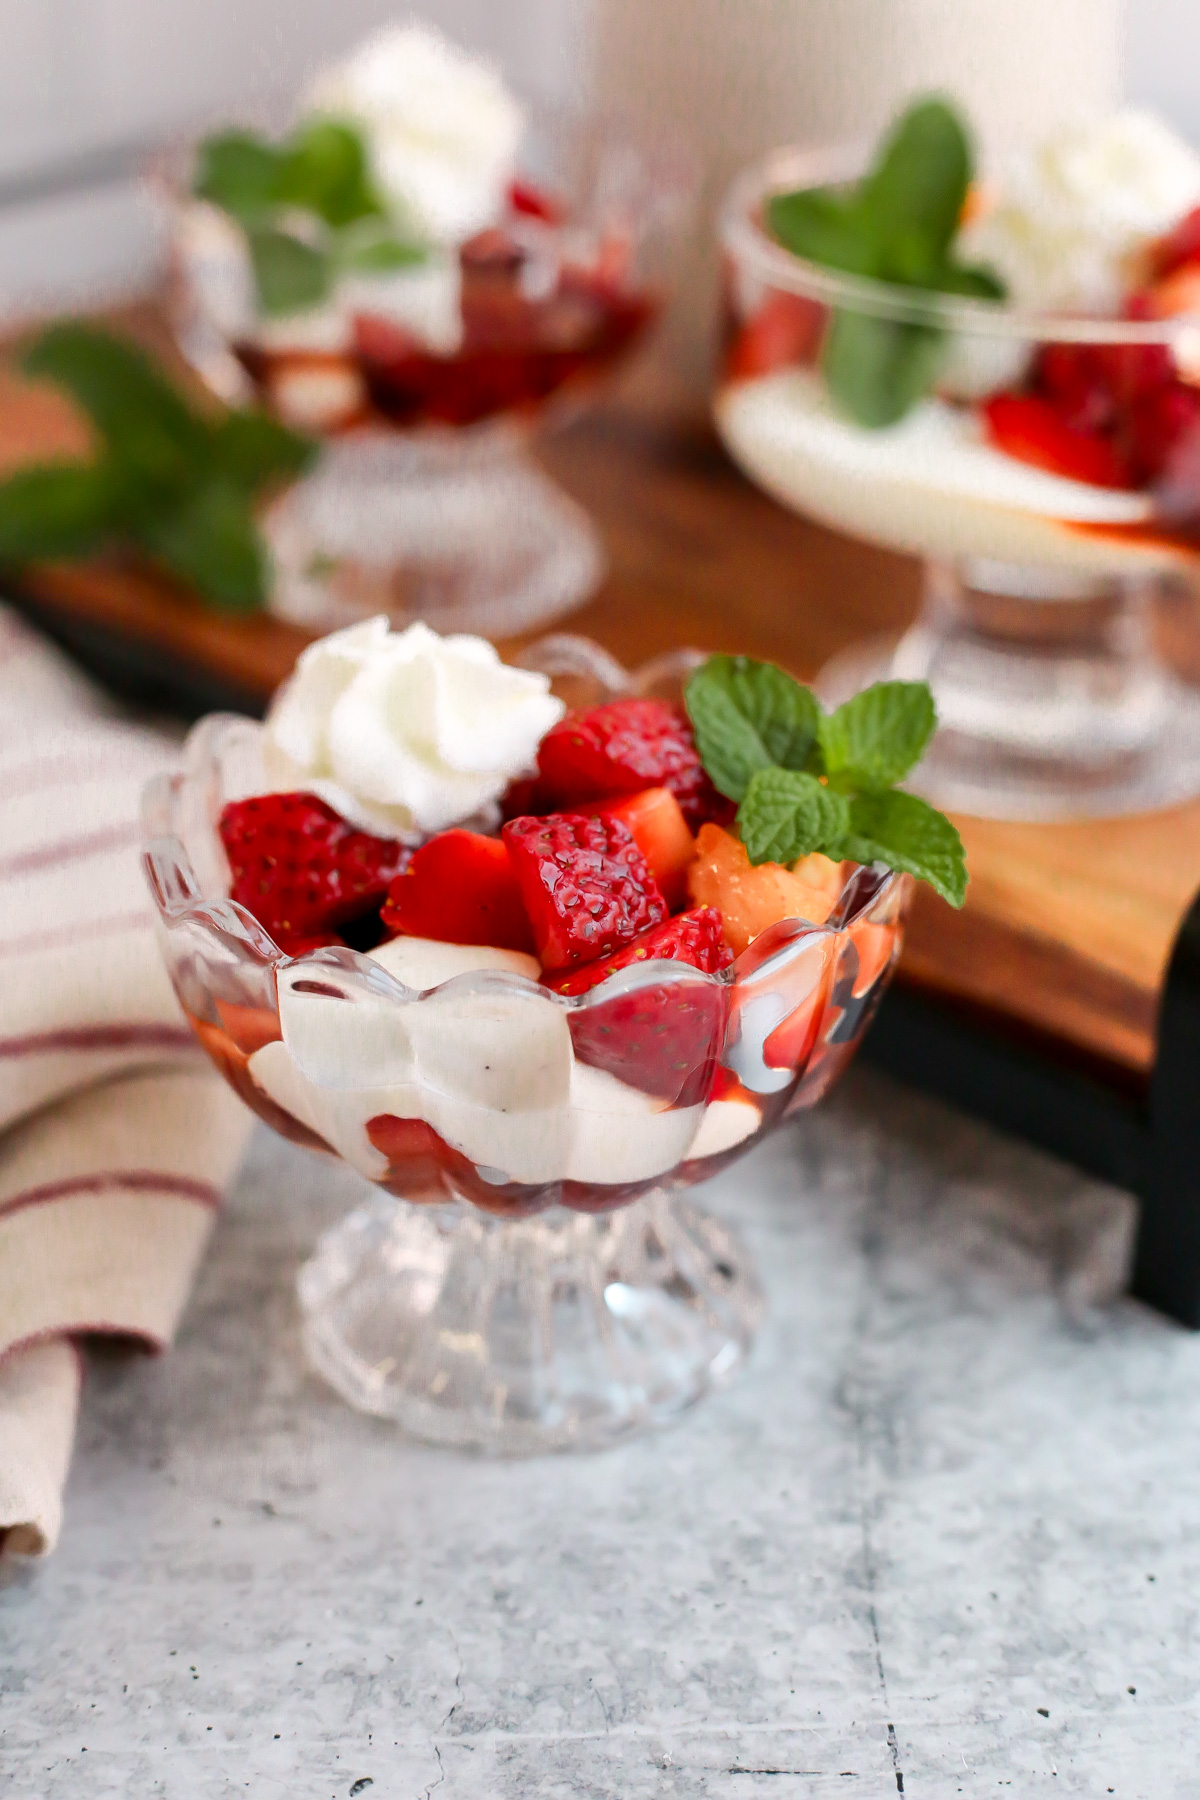 Angled view of a clear glass serving dish filled with Balsamic Macerated Strawberries and Cream. A fresh sprig of mint decorates the side of the dish